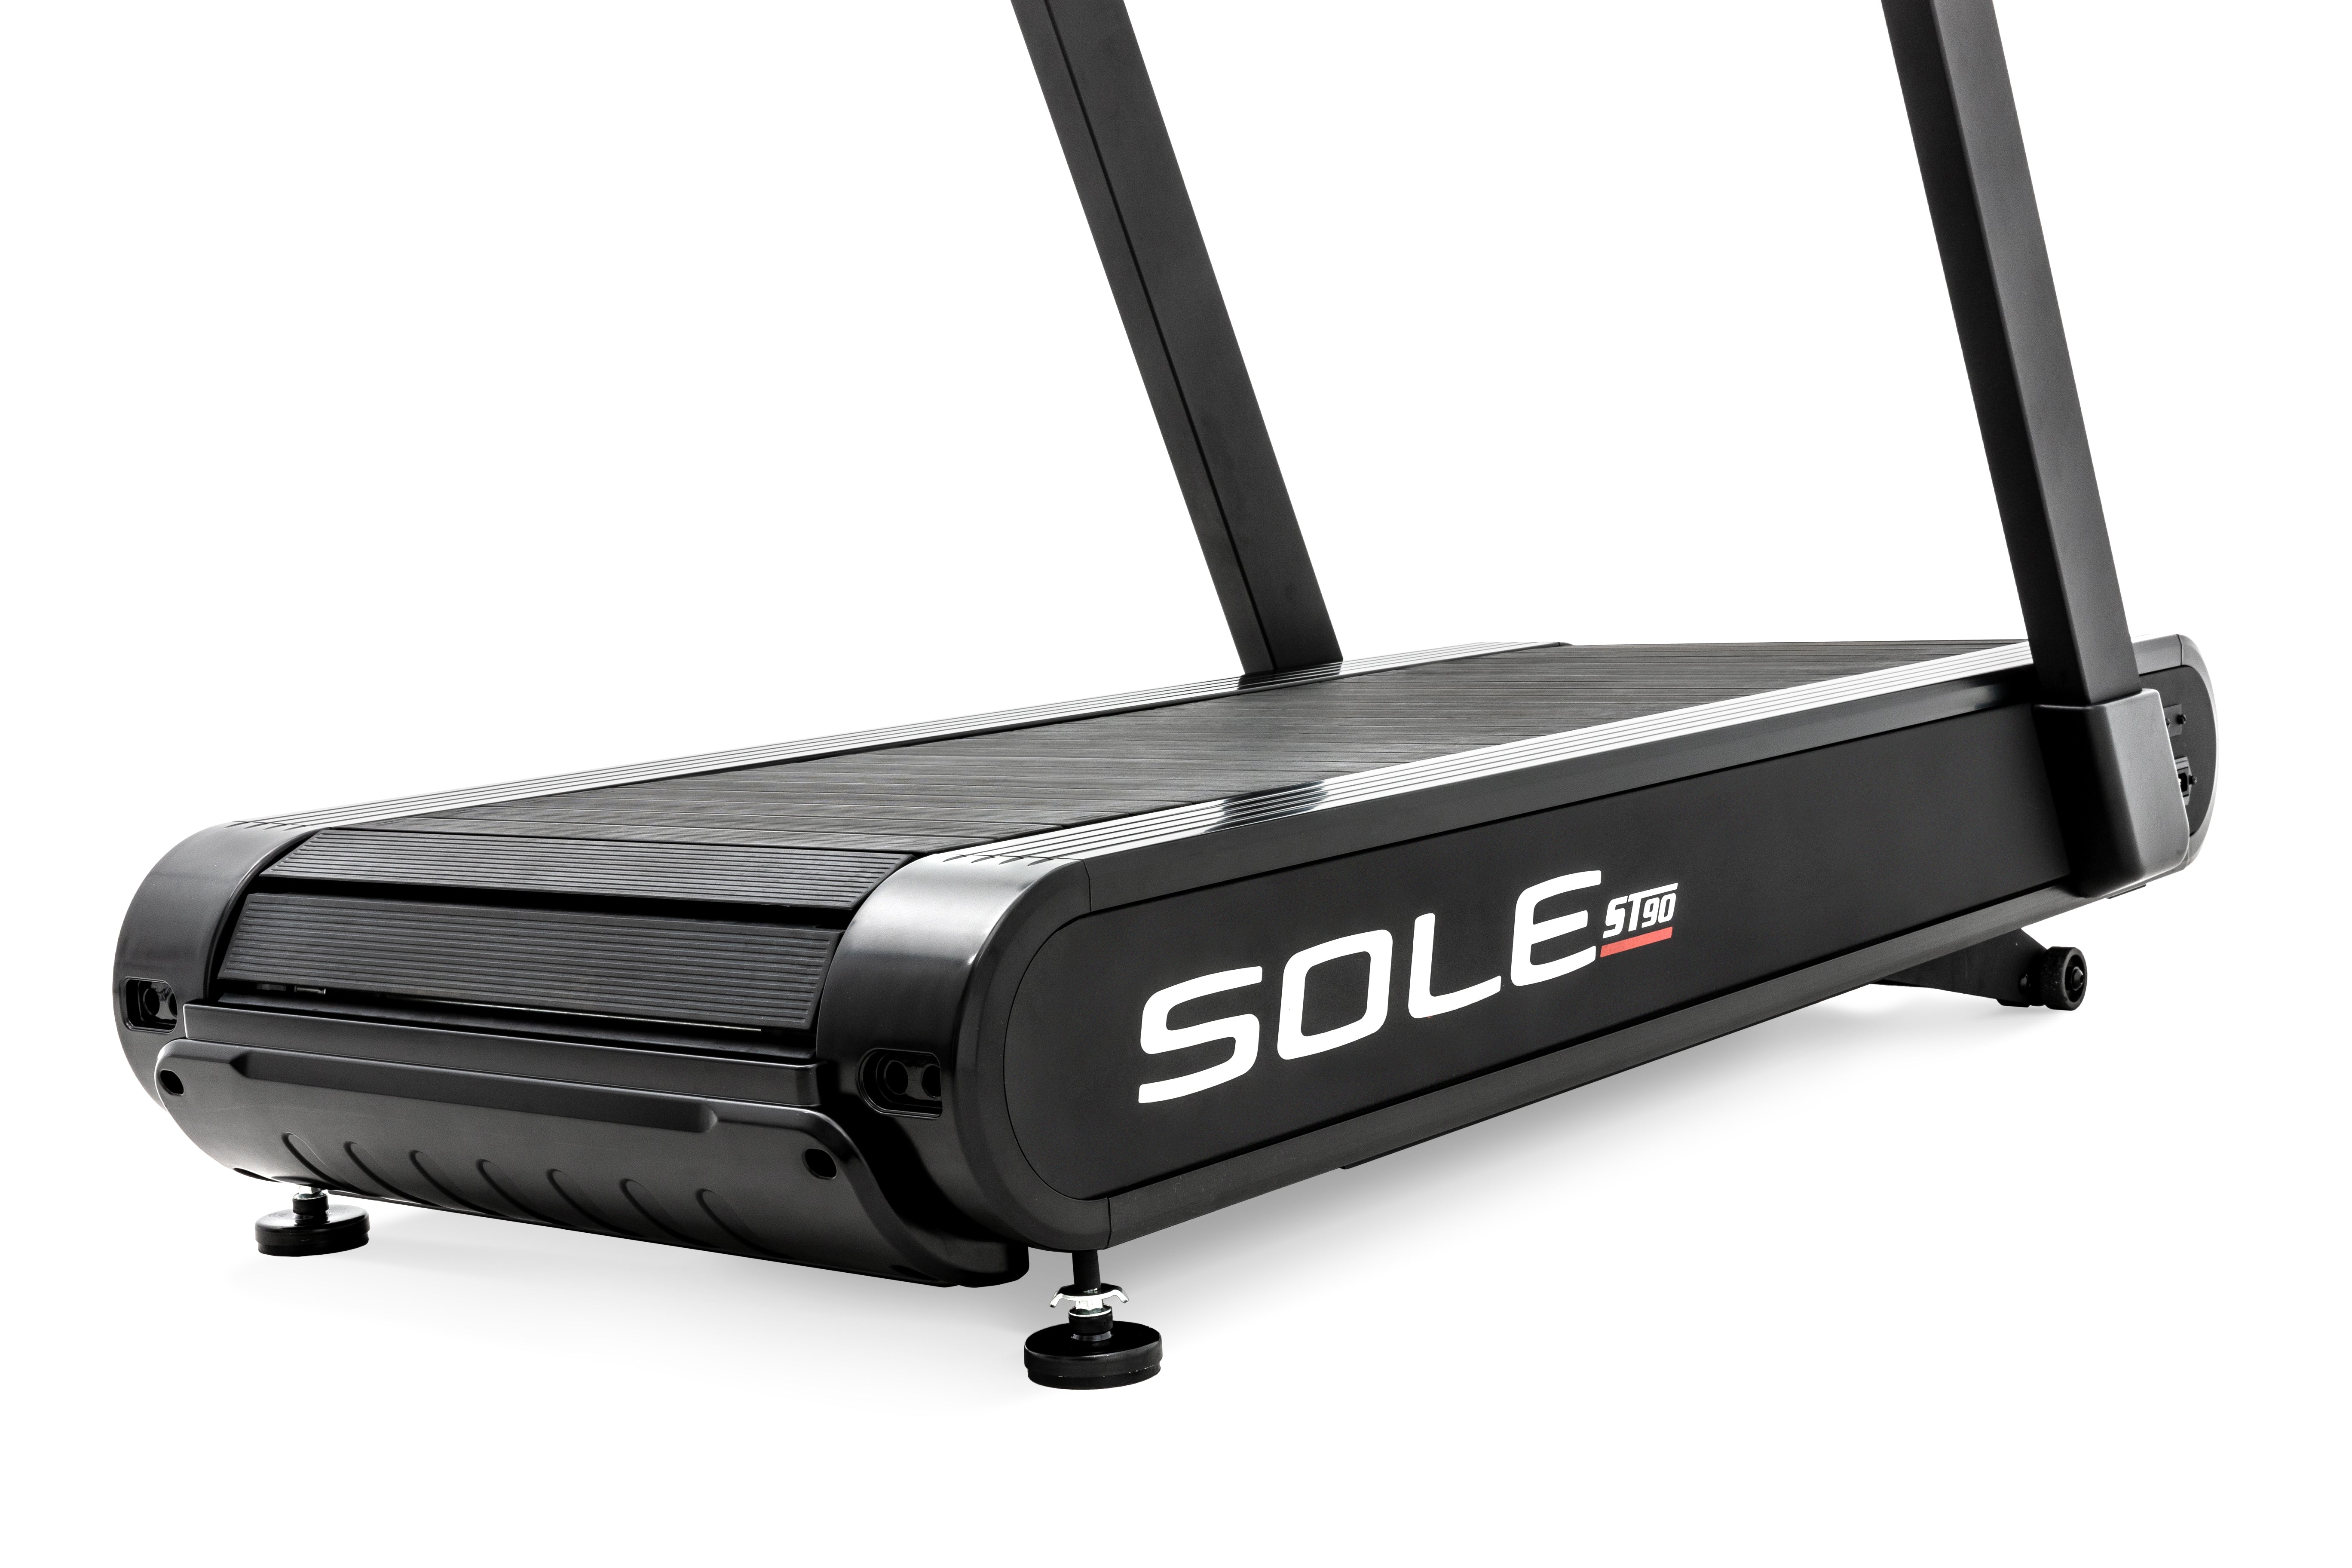 Side profile of the Sole ST90 treadmill, displaying its sleek black design, running belt, prominent SOLE ST90 branding, and sturdy handrails.